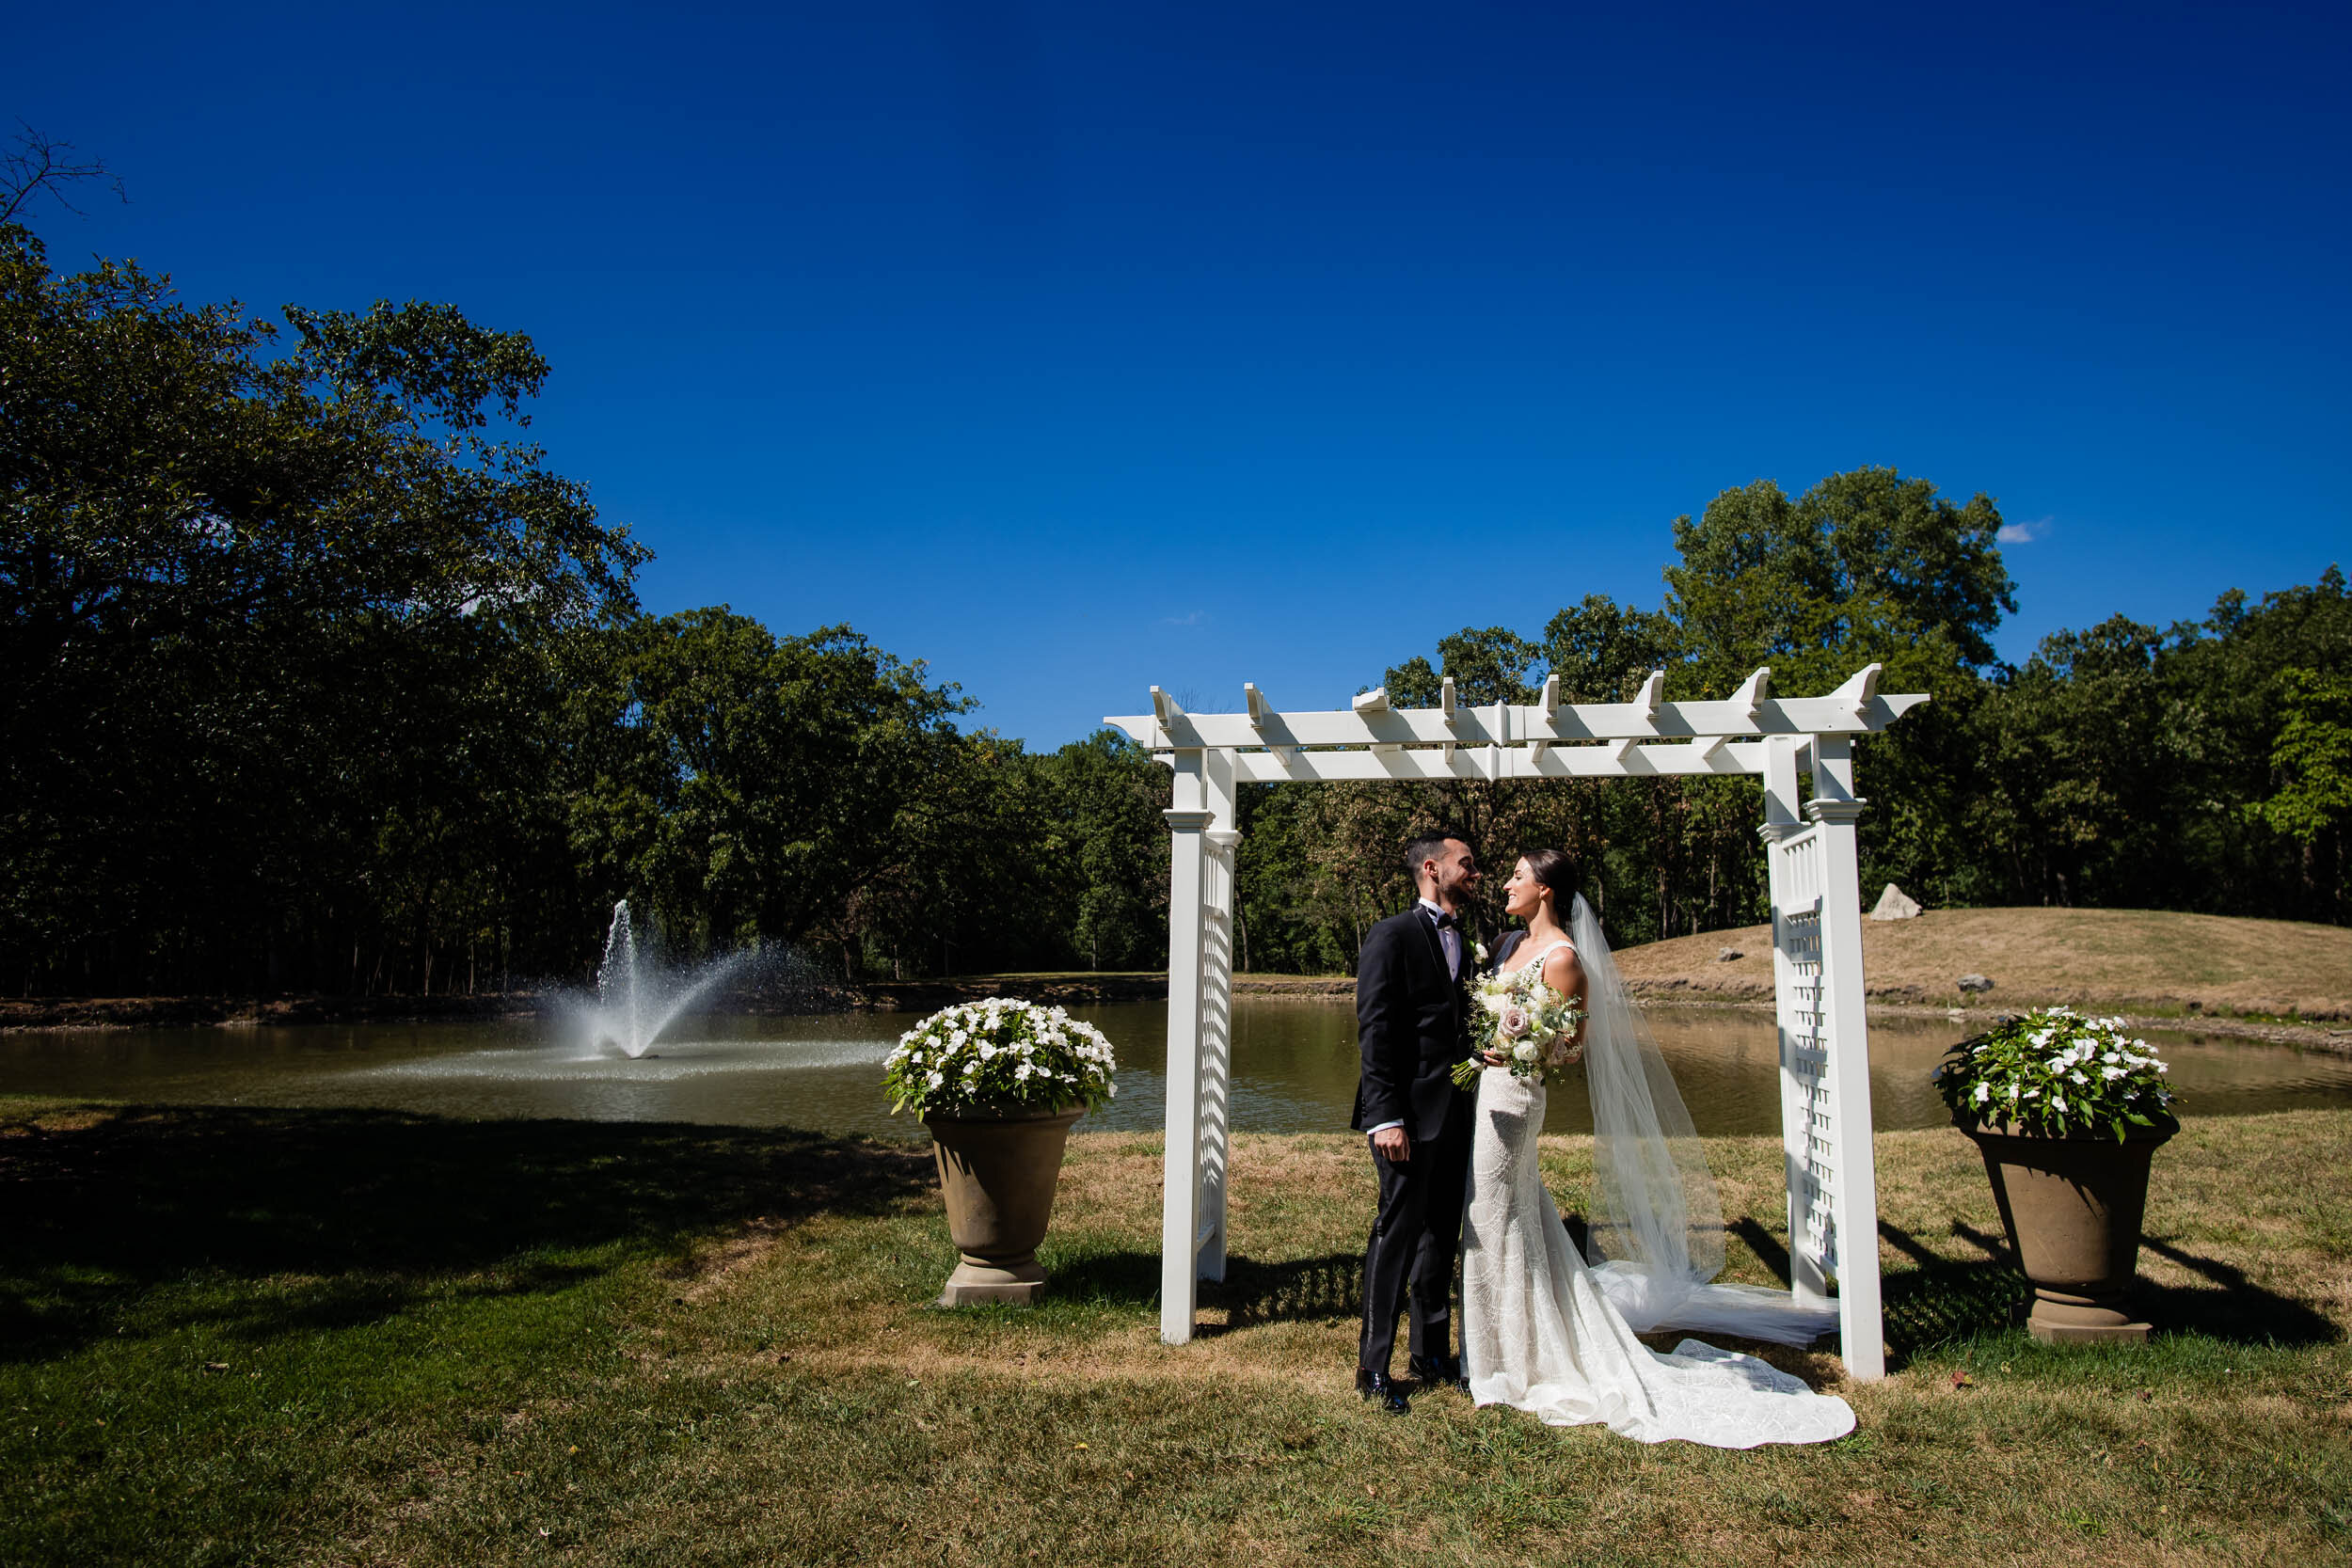 Couple kisses near the pond at the Oakbrook Bath &amp; Tennis Club:  Chicago wedding photography by J. Brown Photography.